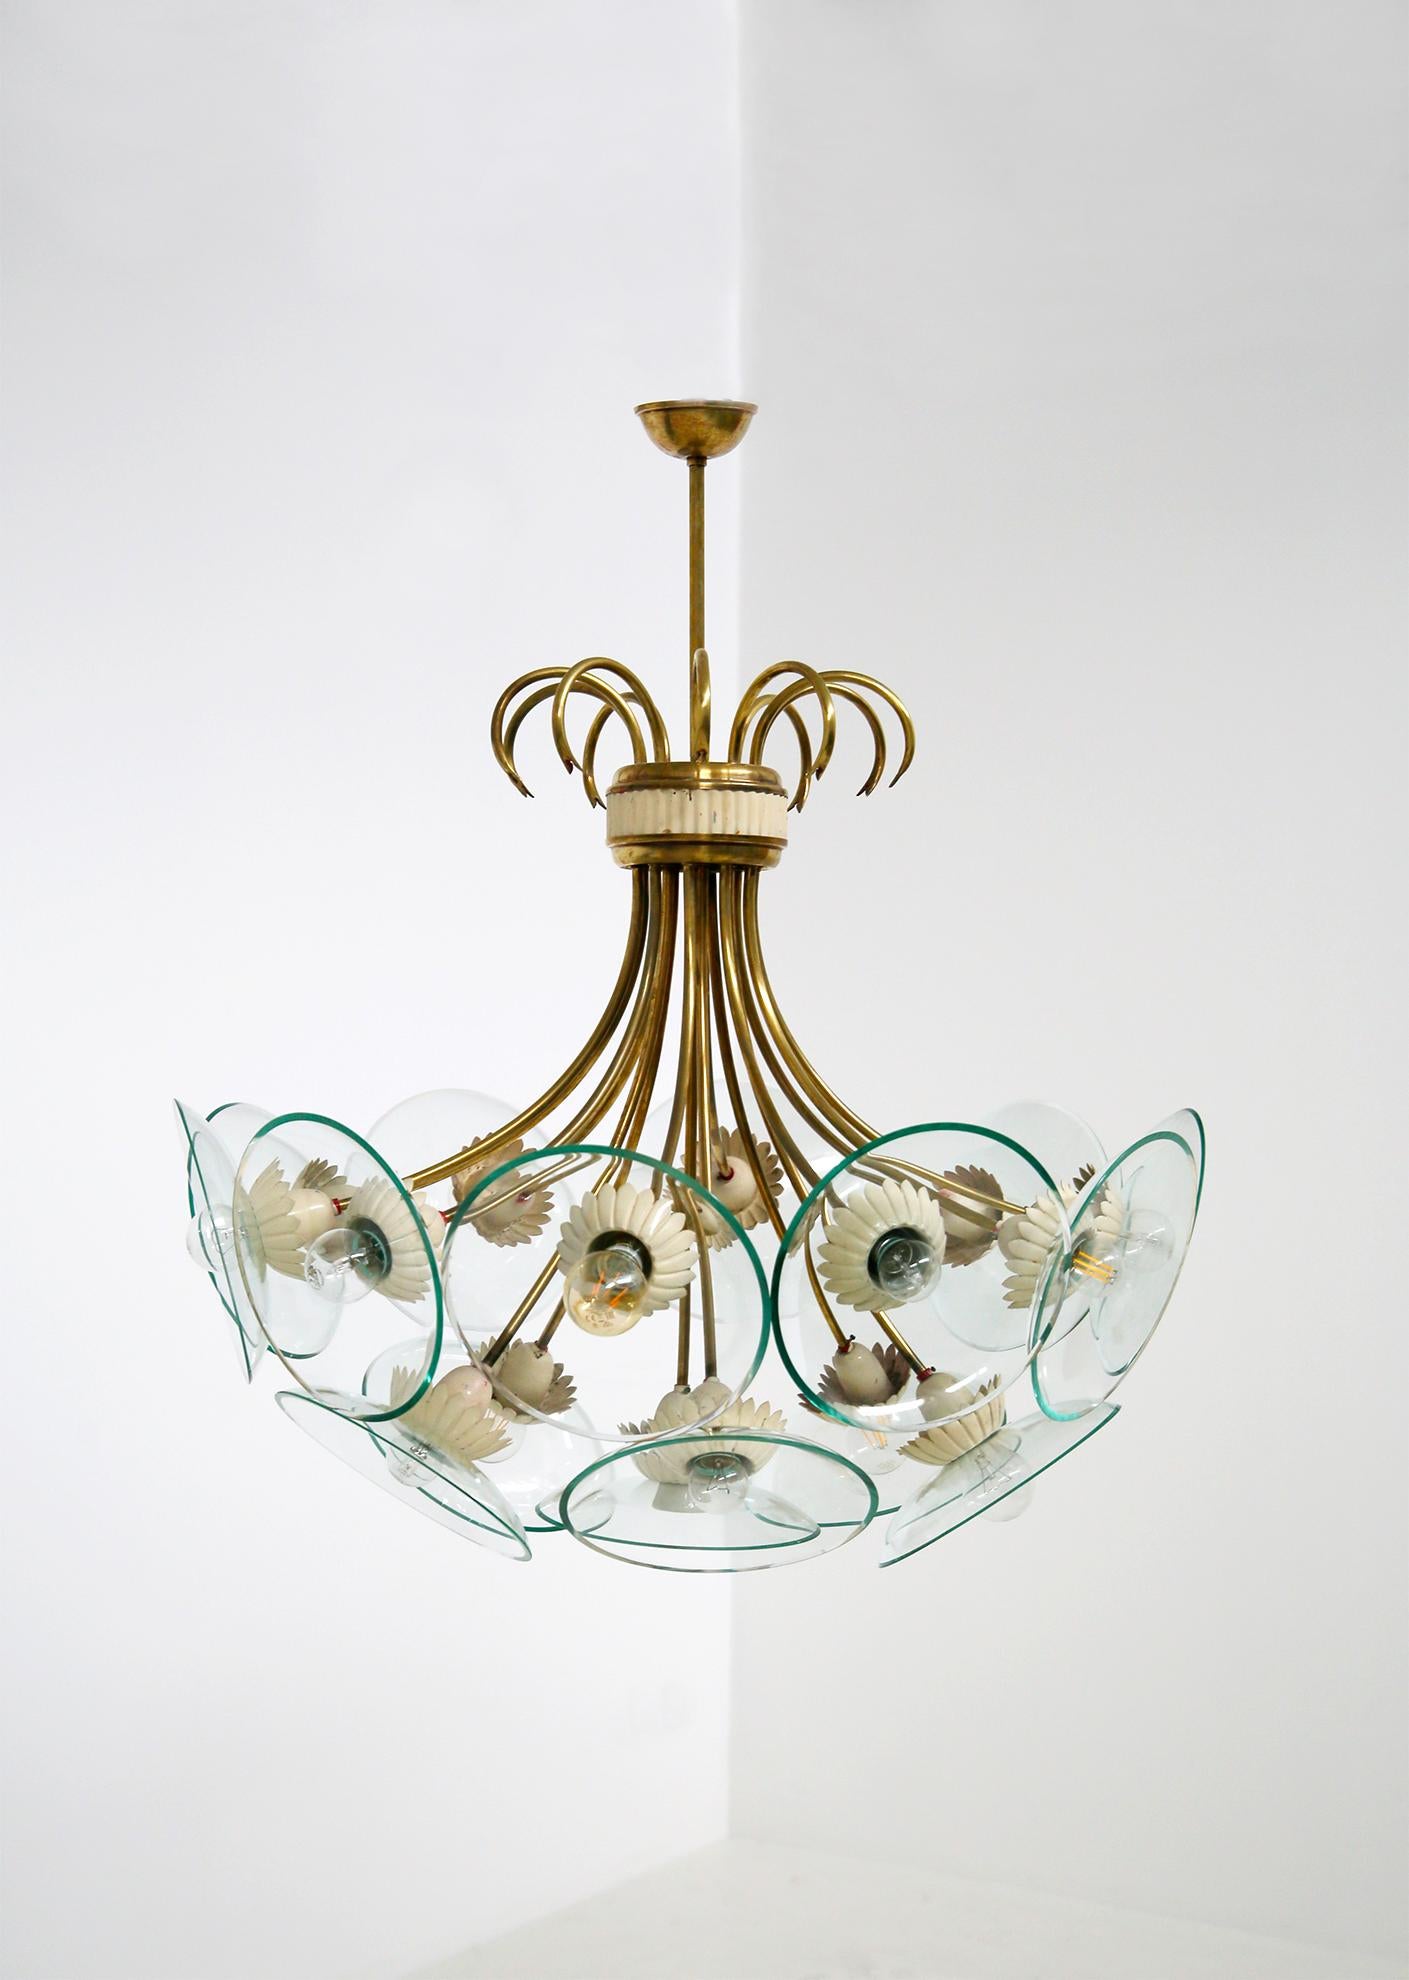 Rare Italian chandelier designed by Pietro Chiesa for the Italian manufacturer Fontana Arte in 1950. The chandelier is made in a brass structure with 16-light.
The chandelier is composed of 16 brass wire arms. At each end we find the bulb holder in